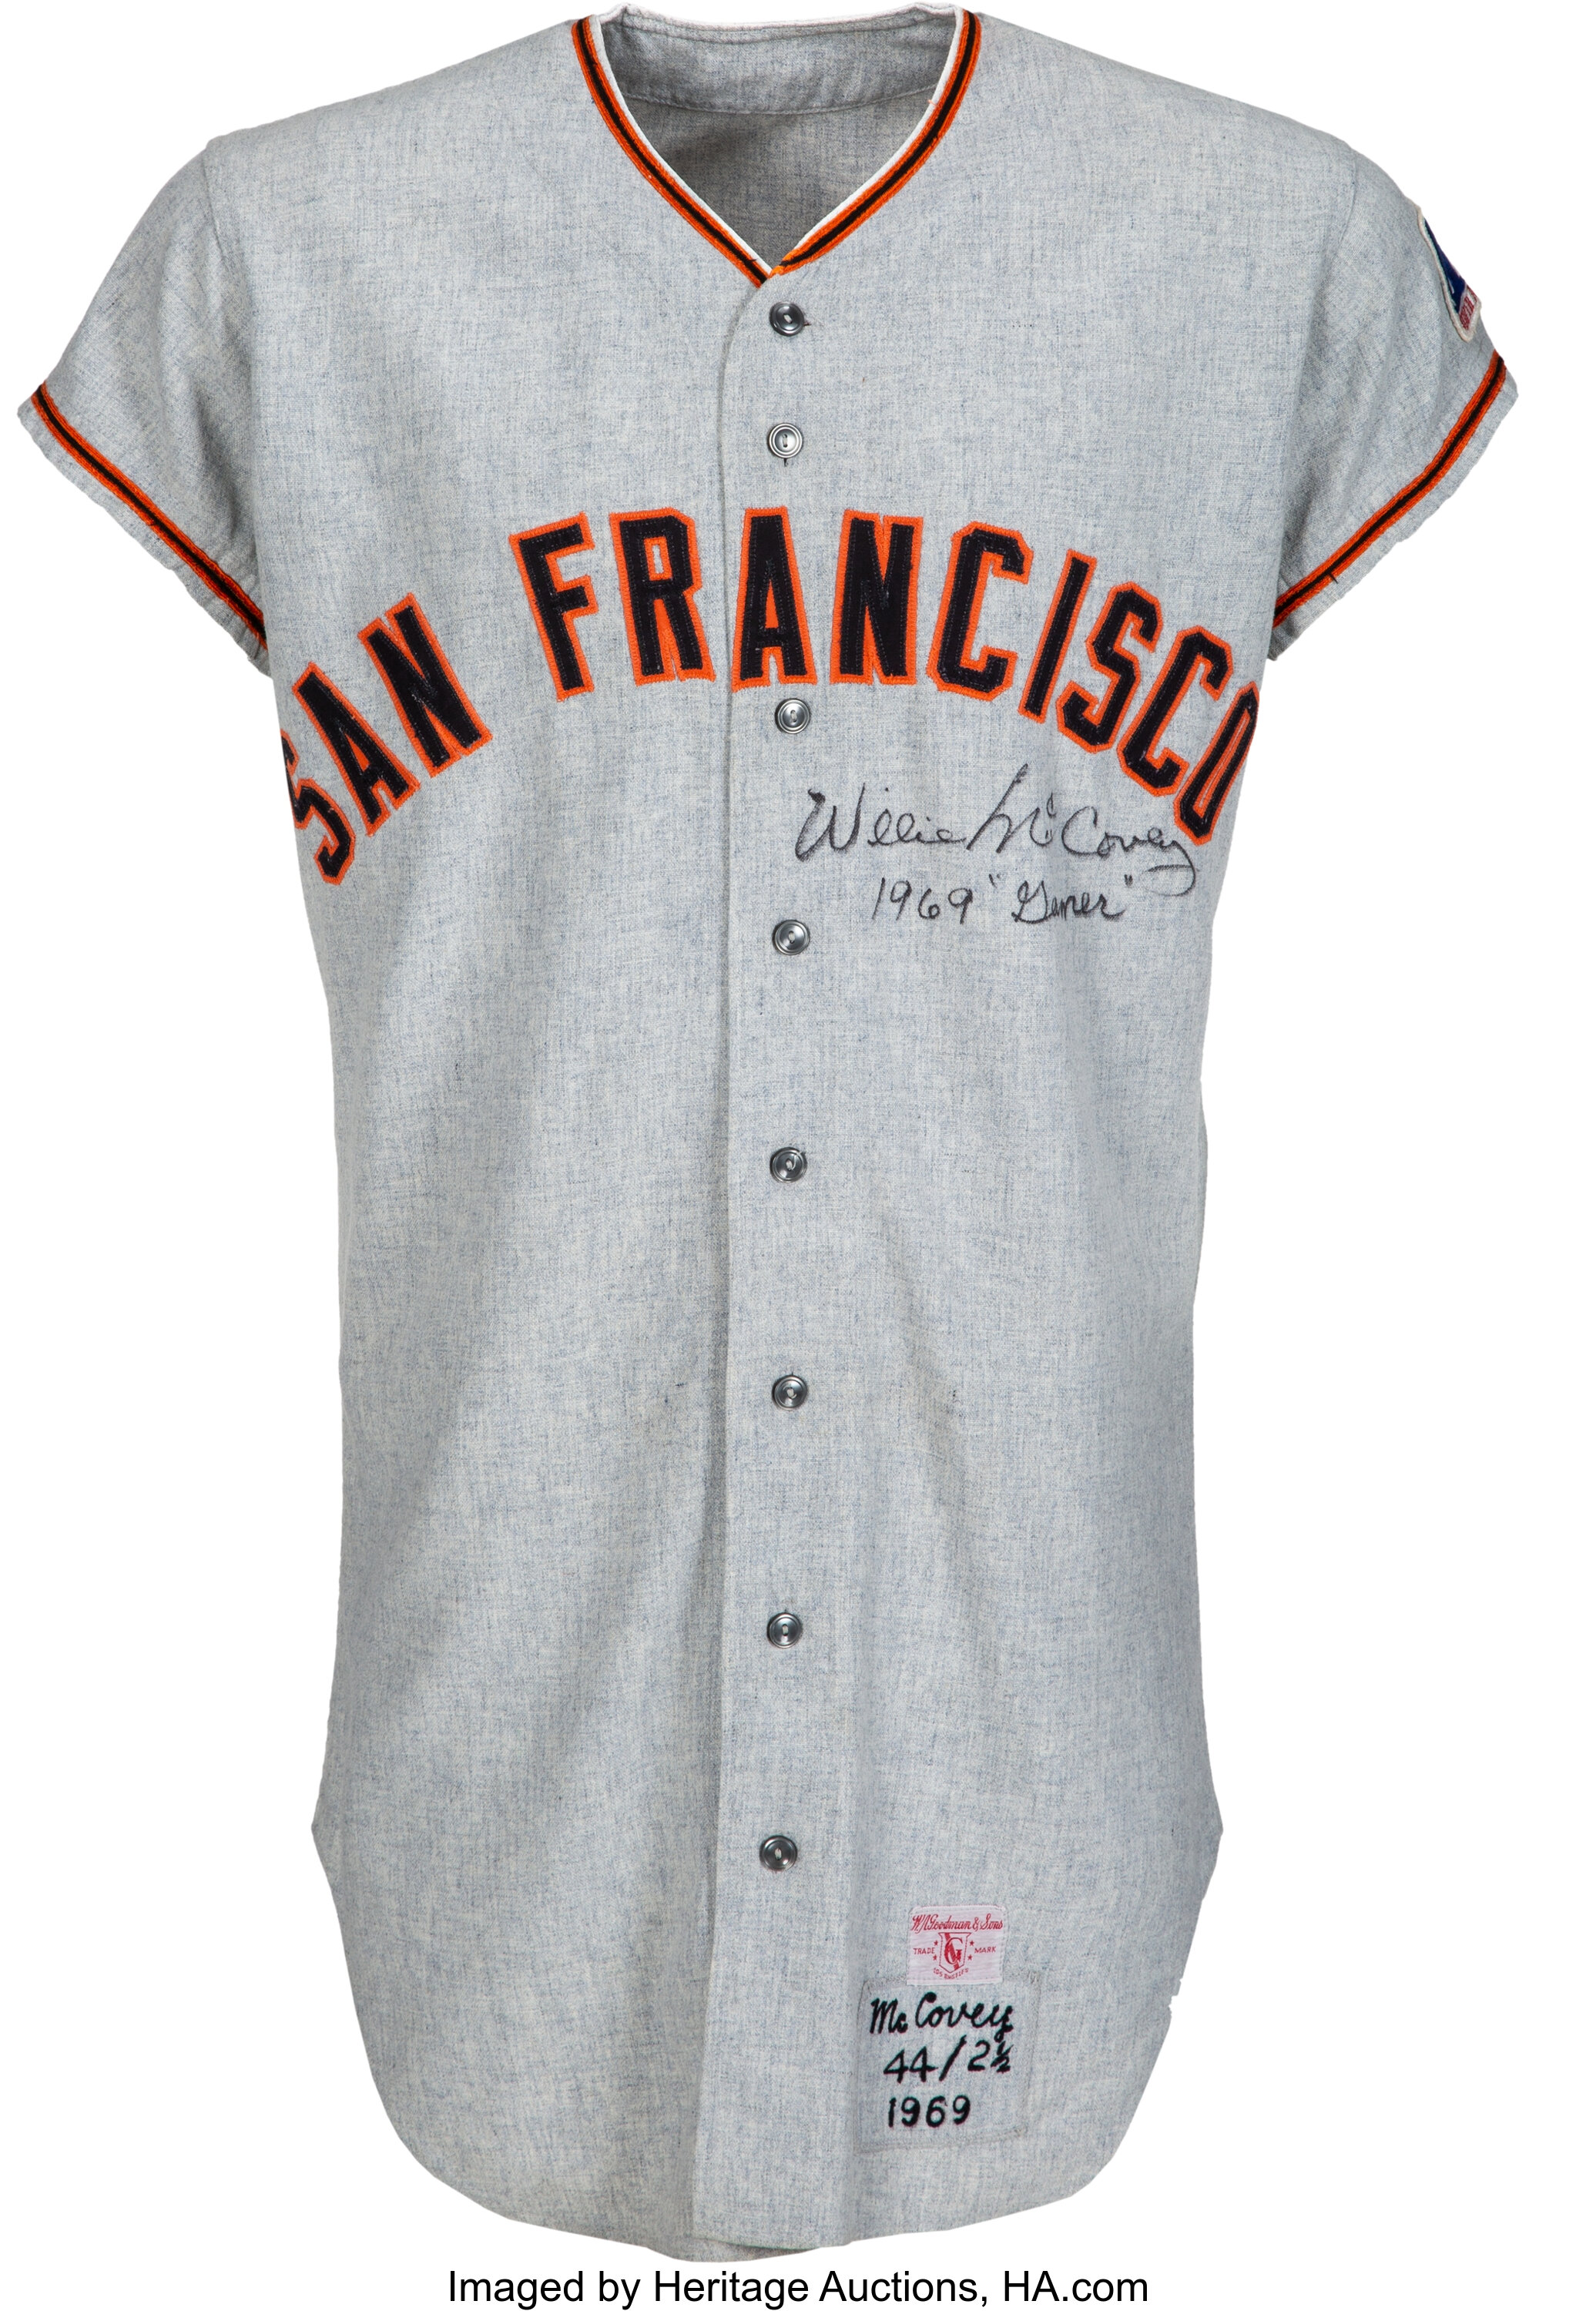 San Francisco Giants to add names to home uniforms - McCovey